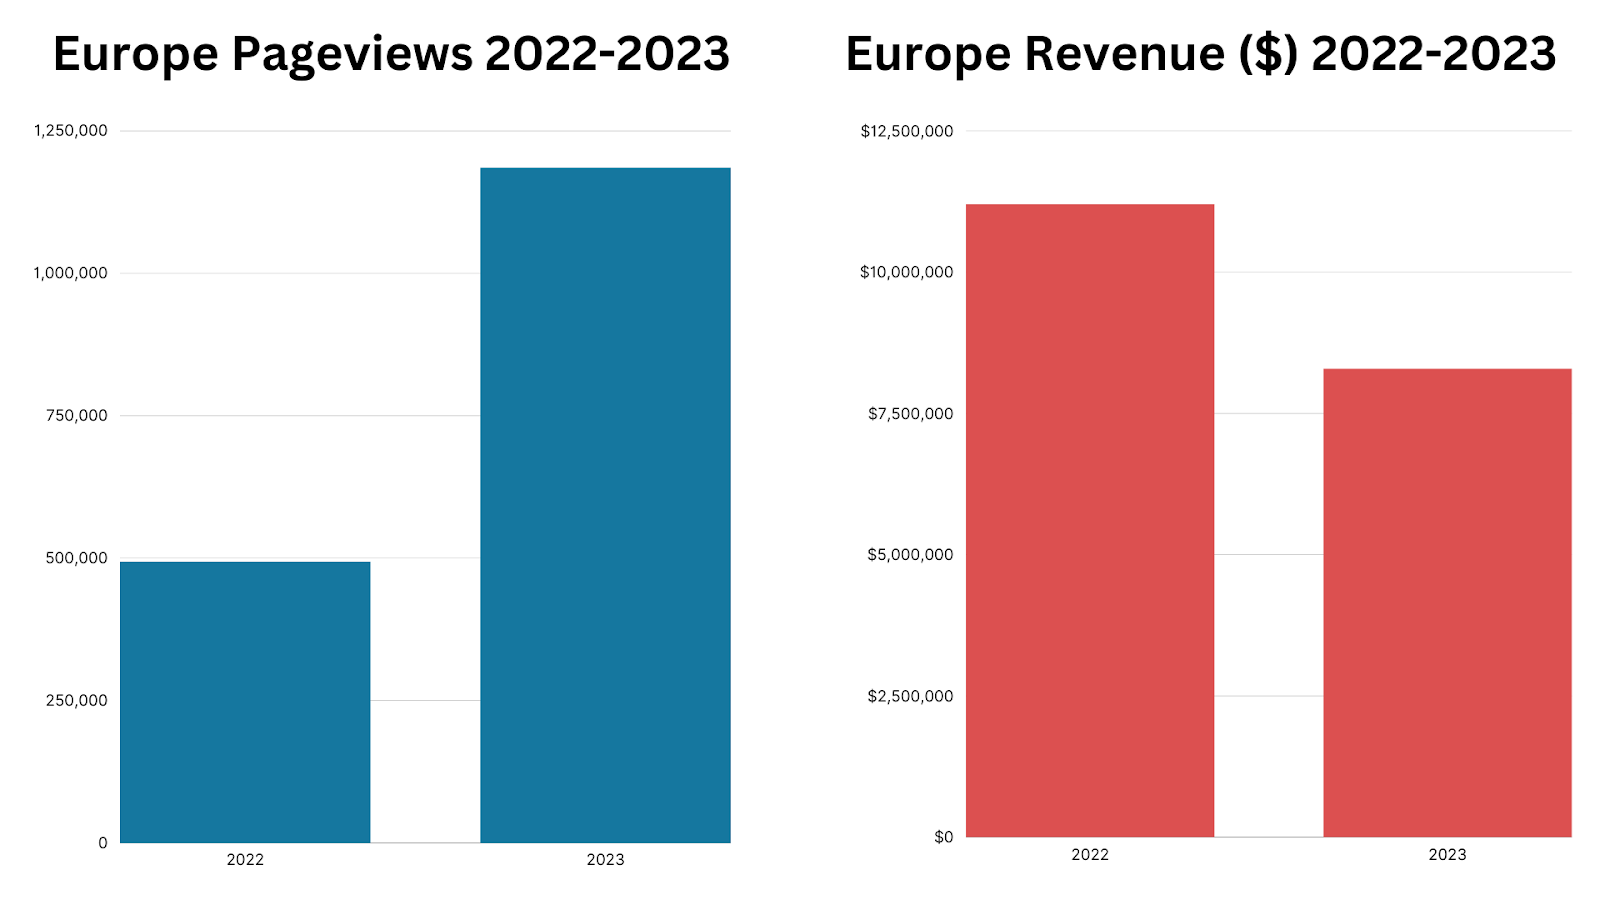 bar graphs showing changes in pageviews and revenue for Europe (2022-2023)